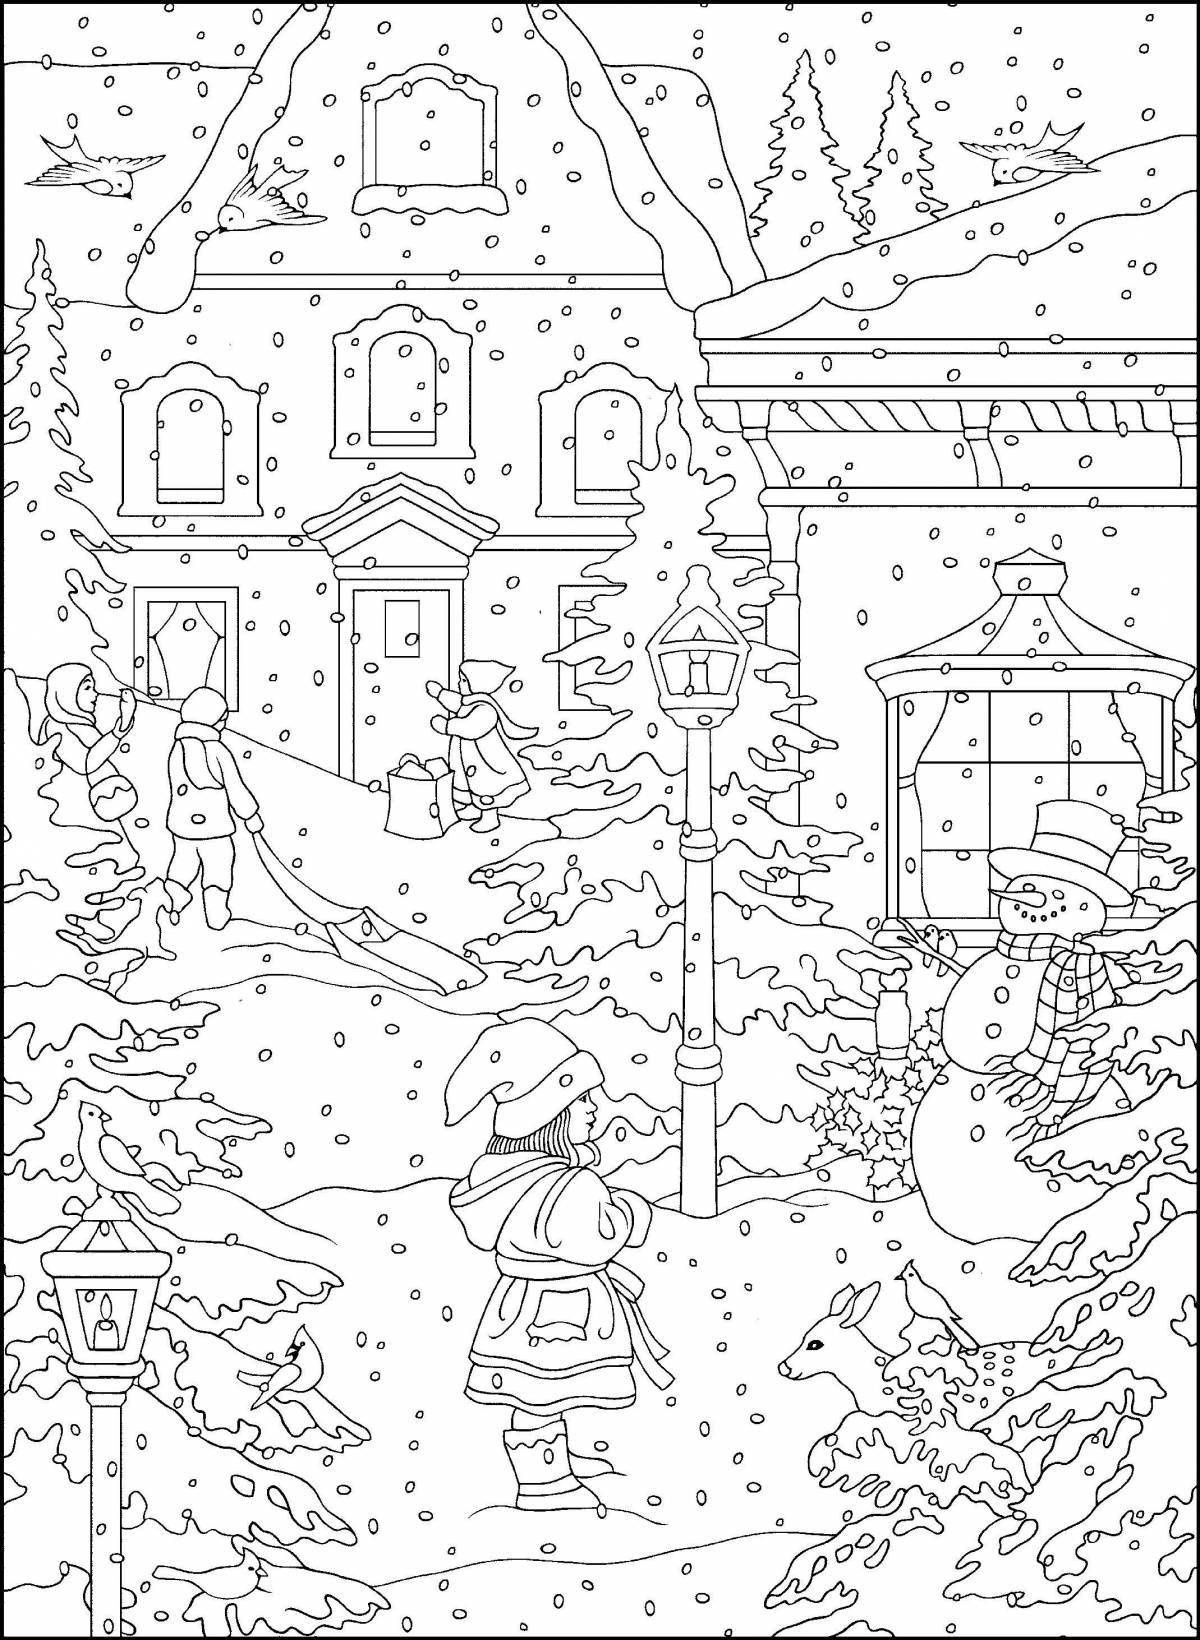 Exquisite winter anti-stress coloring book for kids